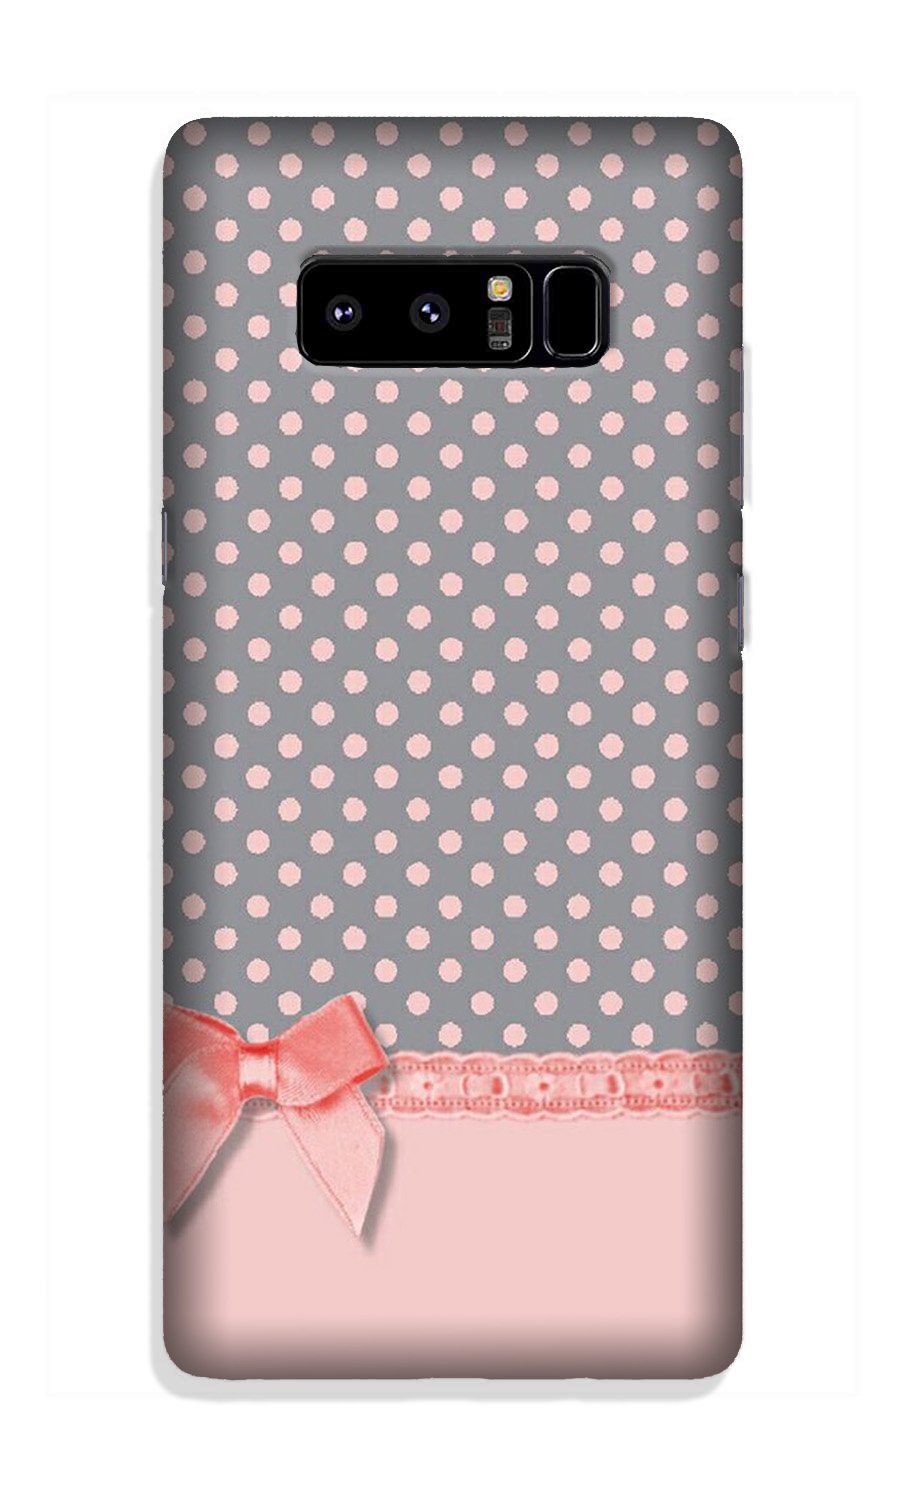 Gift Wrap2 Case for Galaxy Note 8